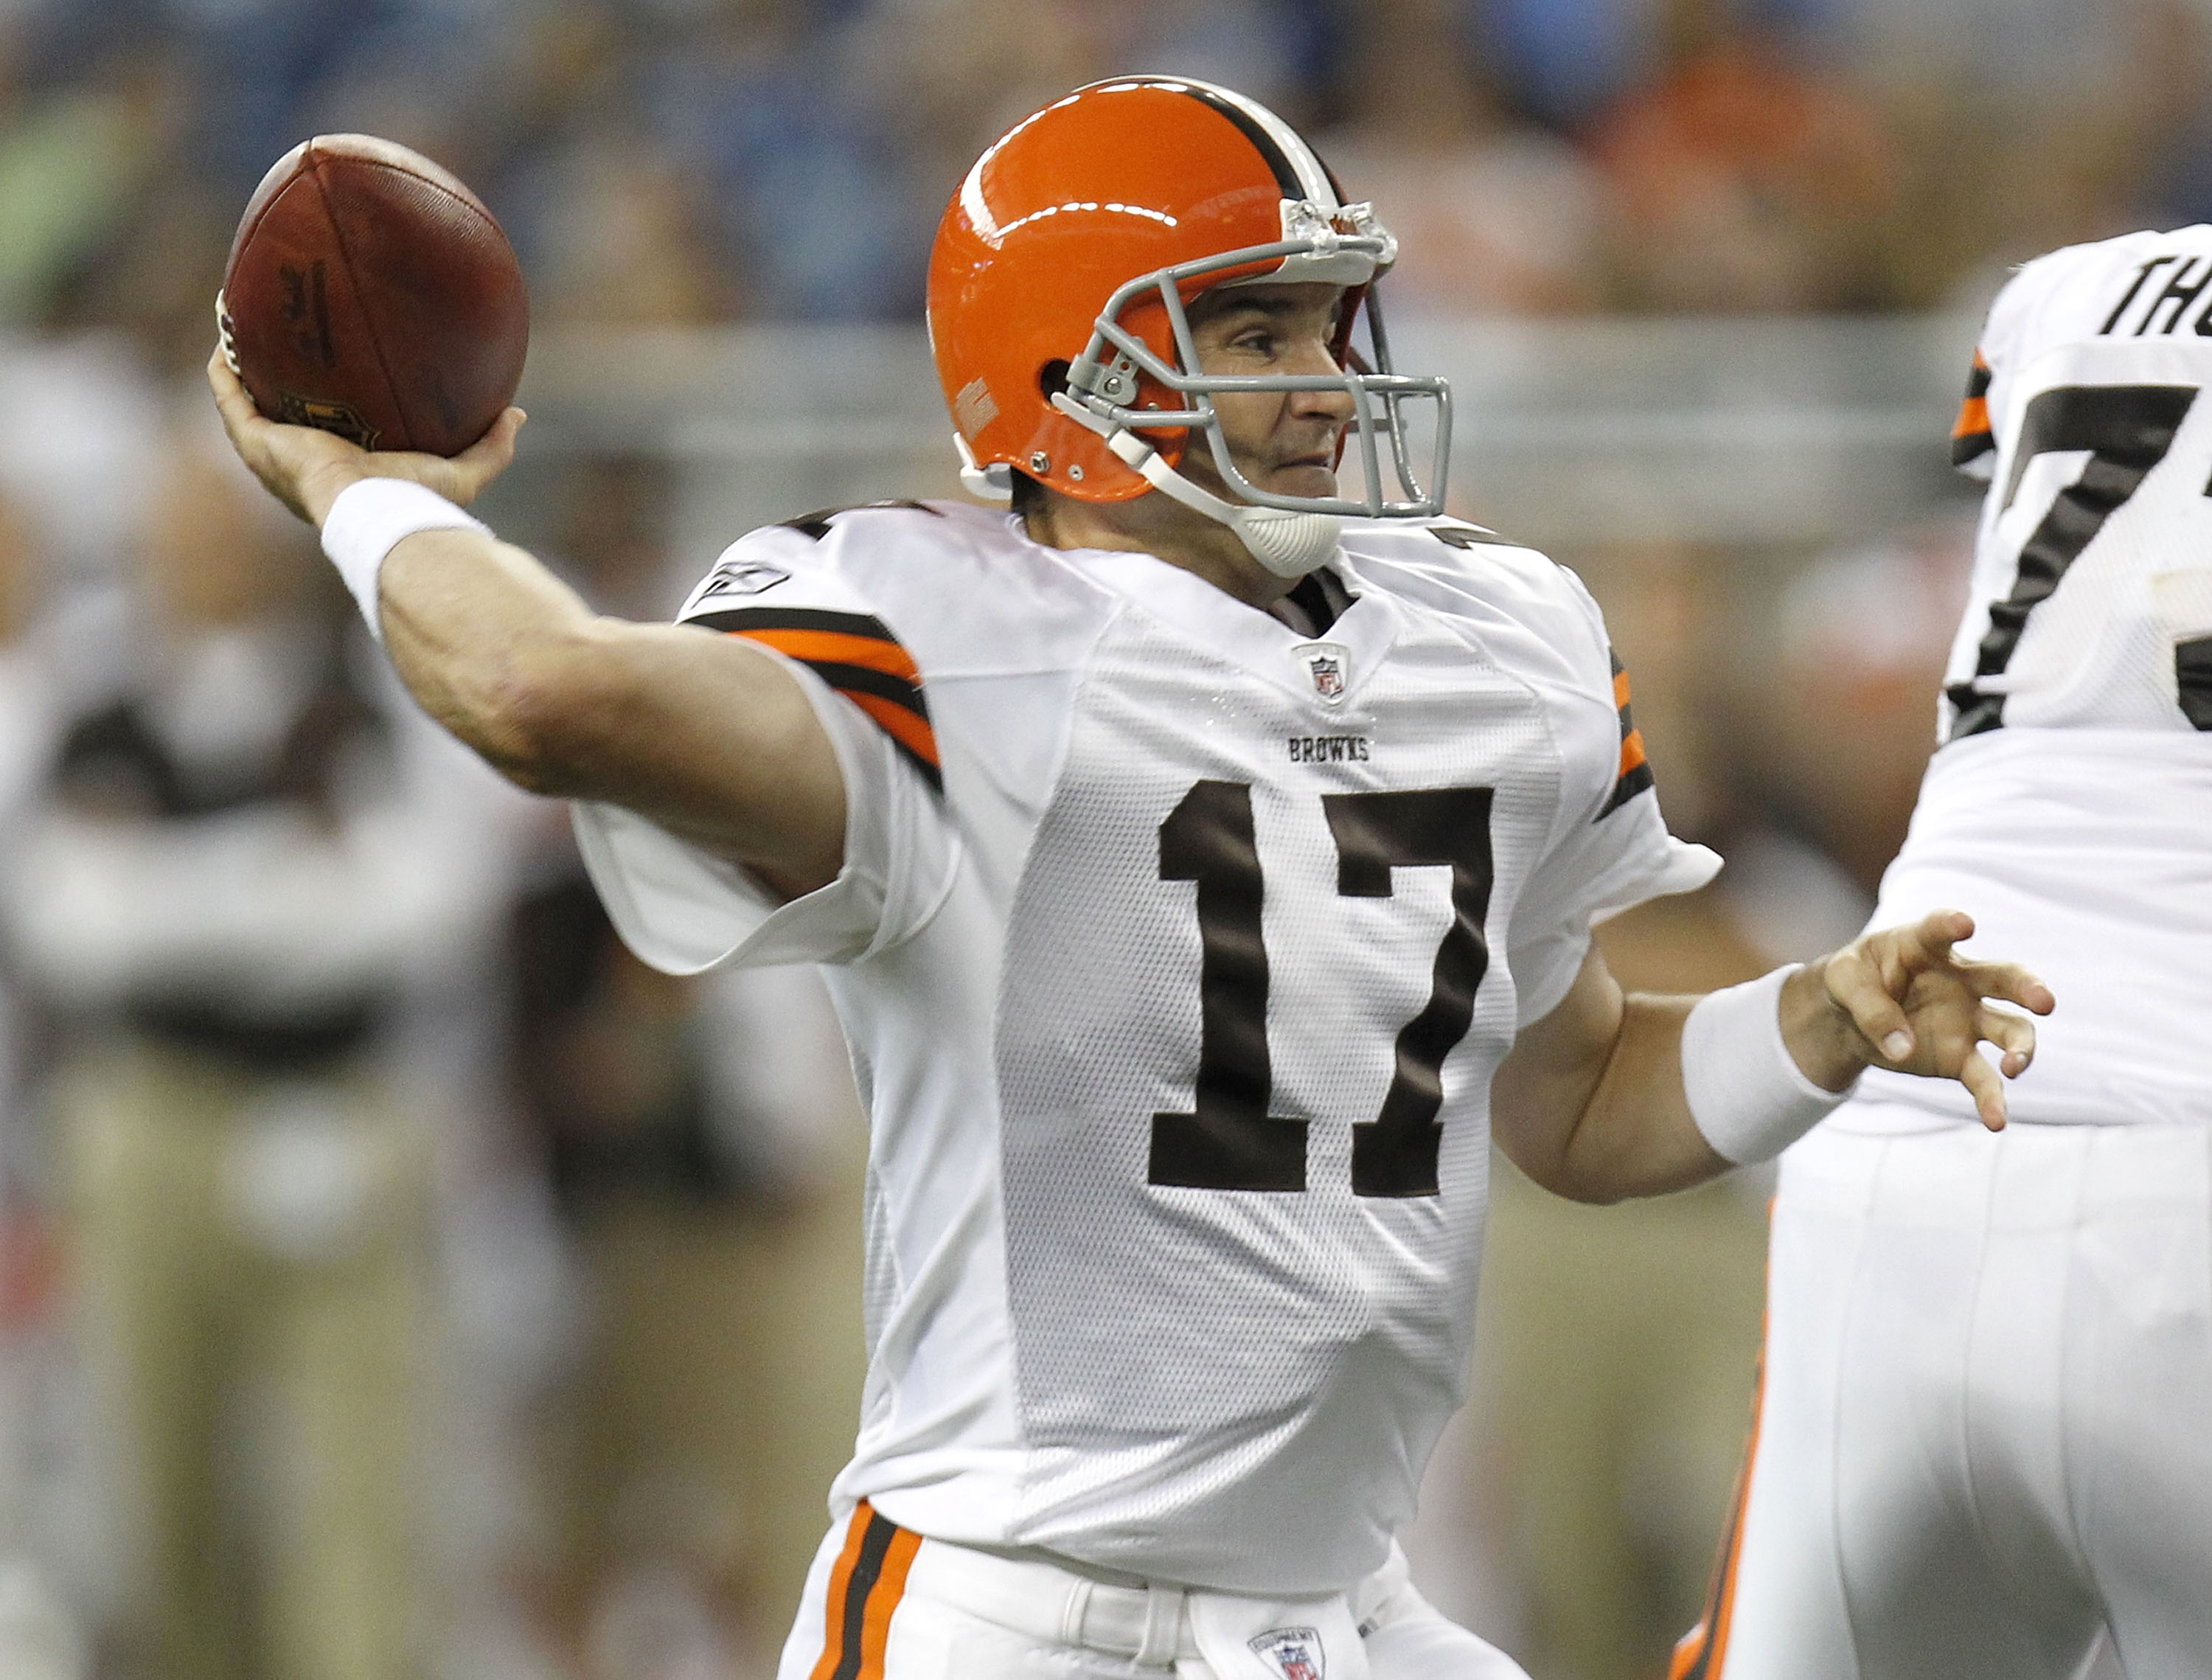 Cleveland Browns Vs Detroit Lions: 10 Observations on the Brownies